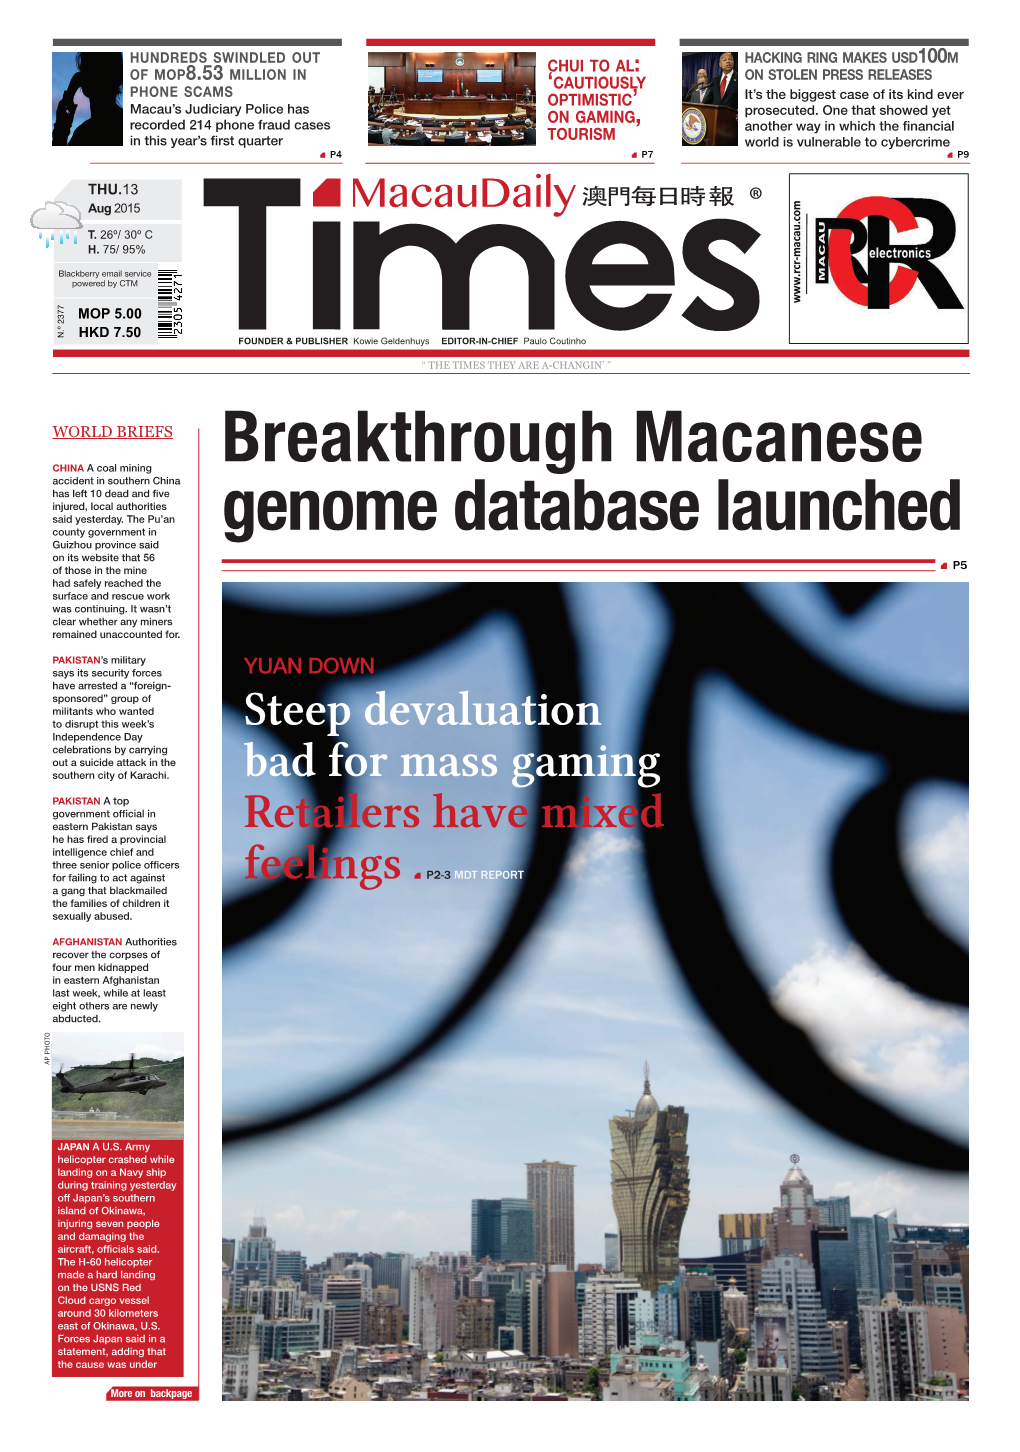 Breakthrough Macanese Genome Database Launched